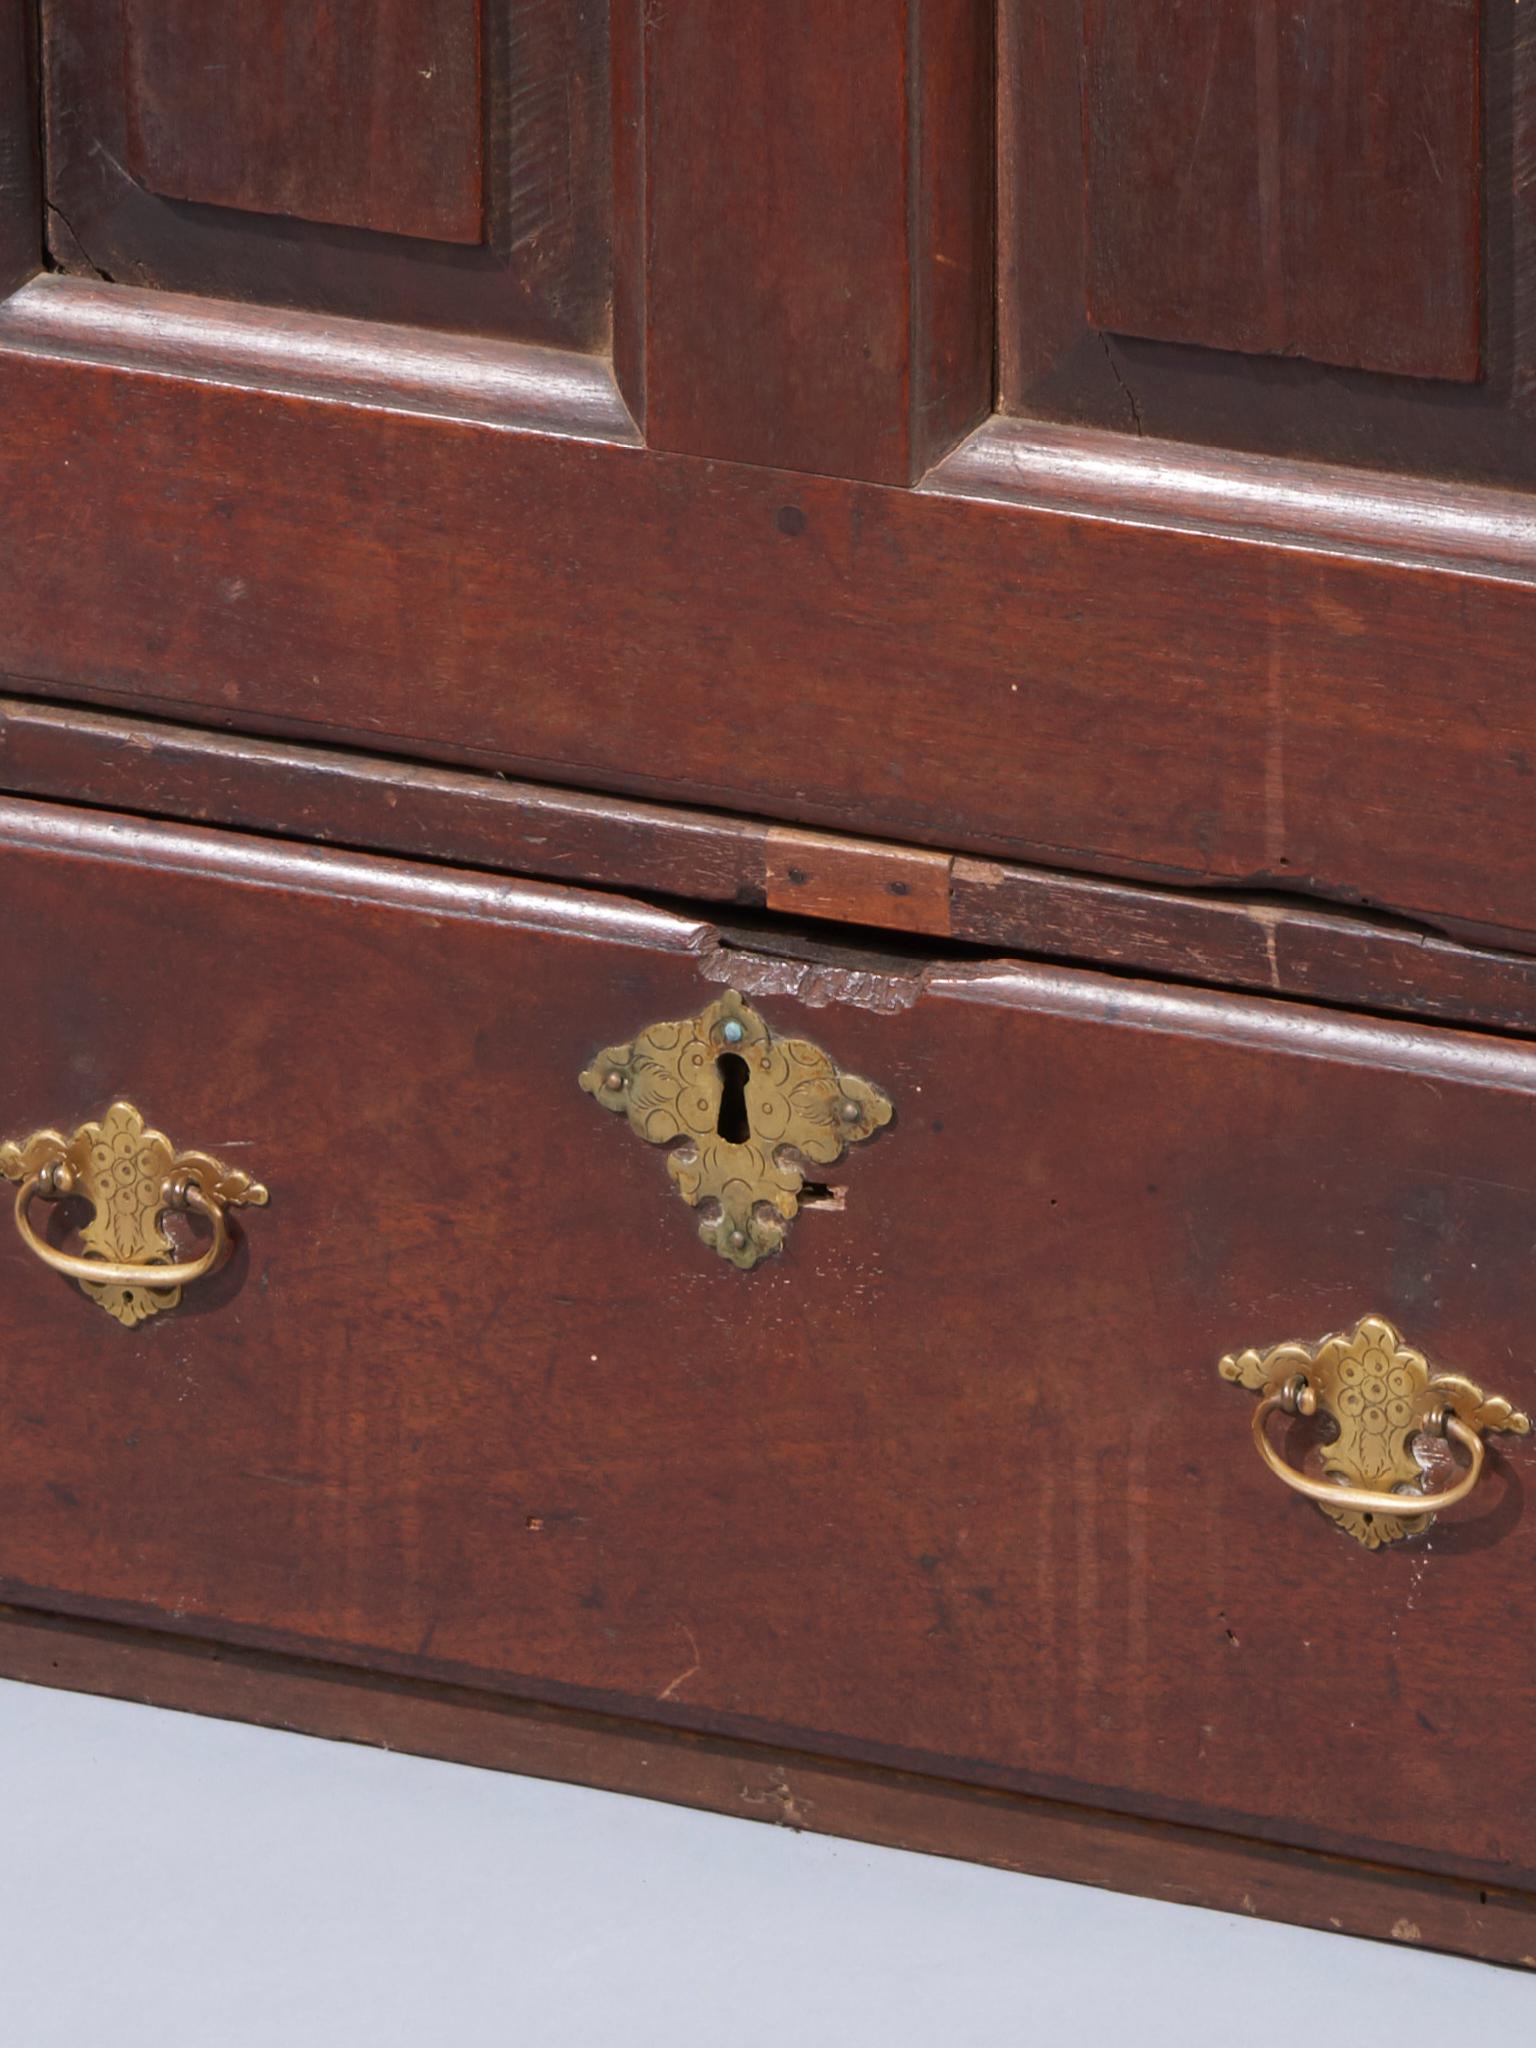 Slant back at the top, double raised panel door and one-drawer below with early engraved brasses, Pennsylvania, circa 1750.